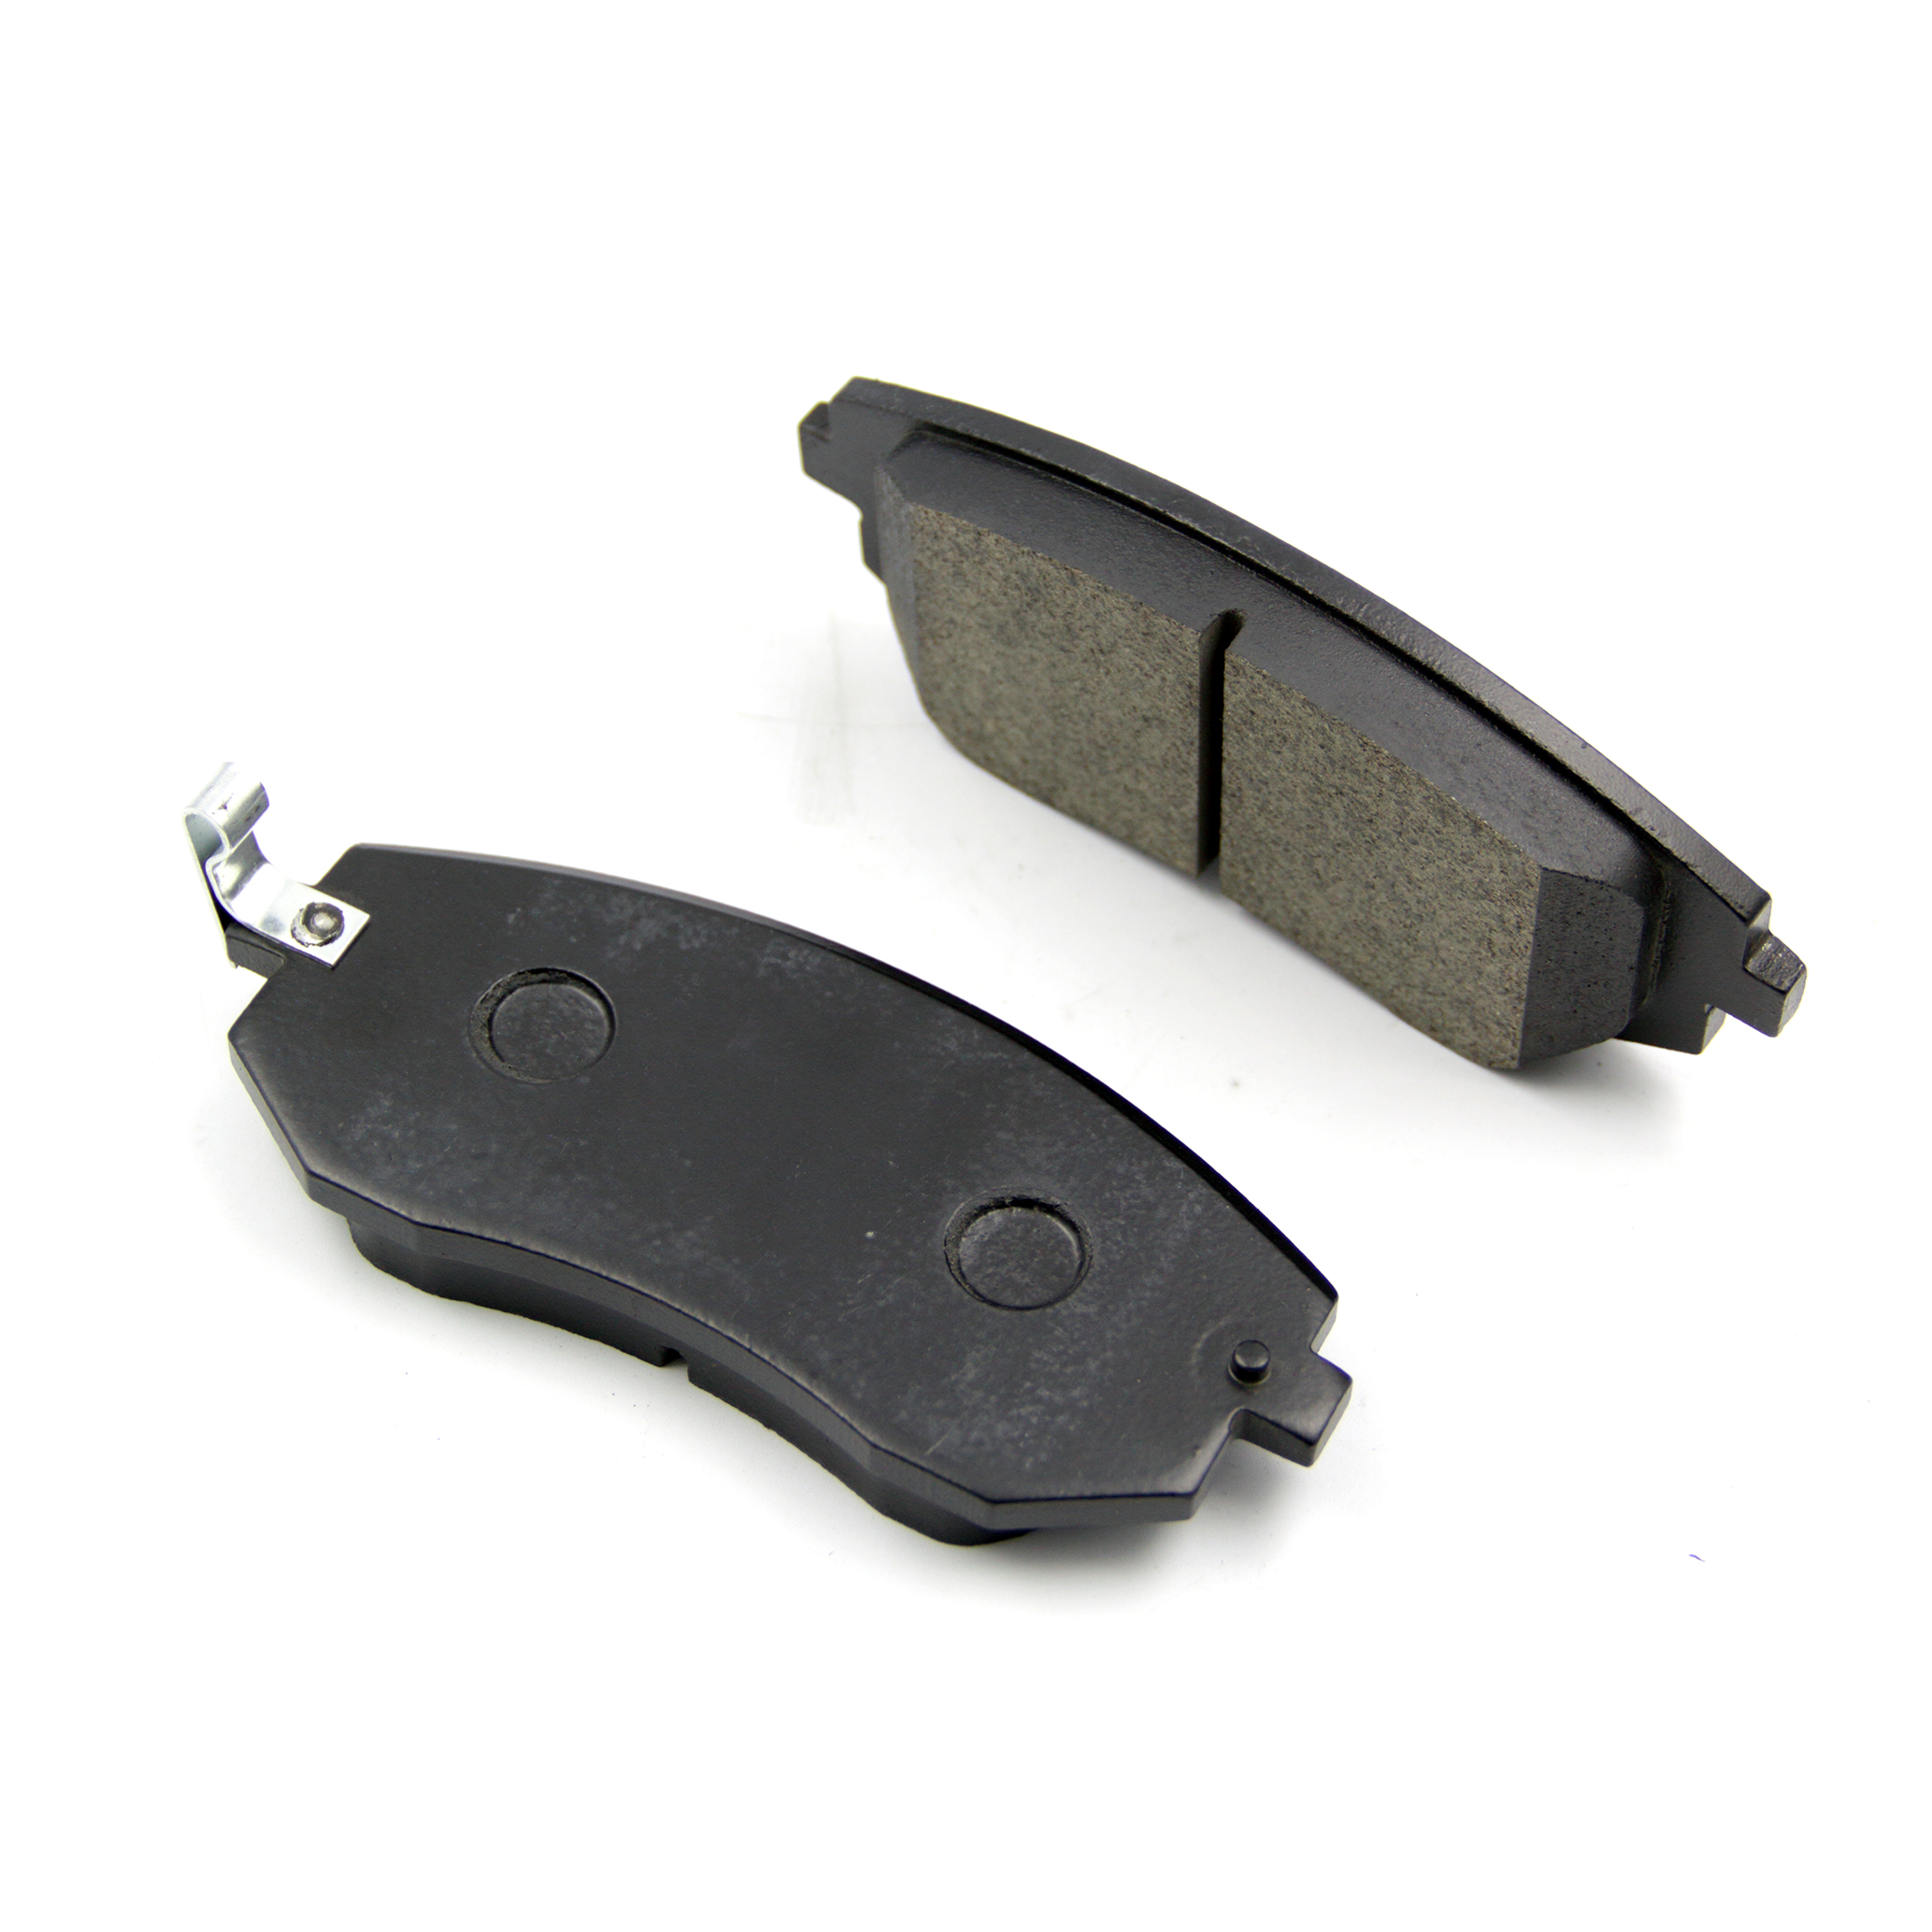 New Brake Pad Technology Redefines Stopping Power for Vehicles Across the Board